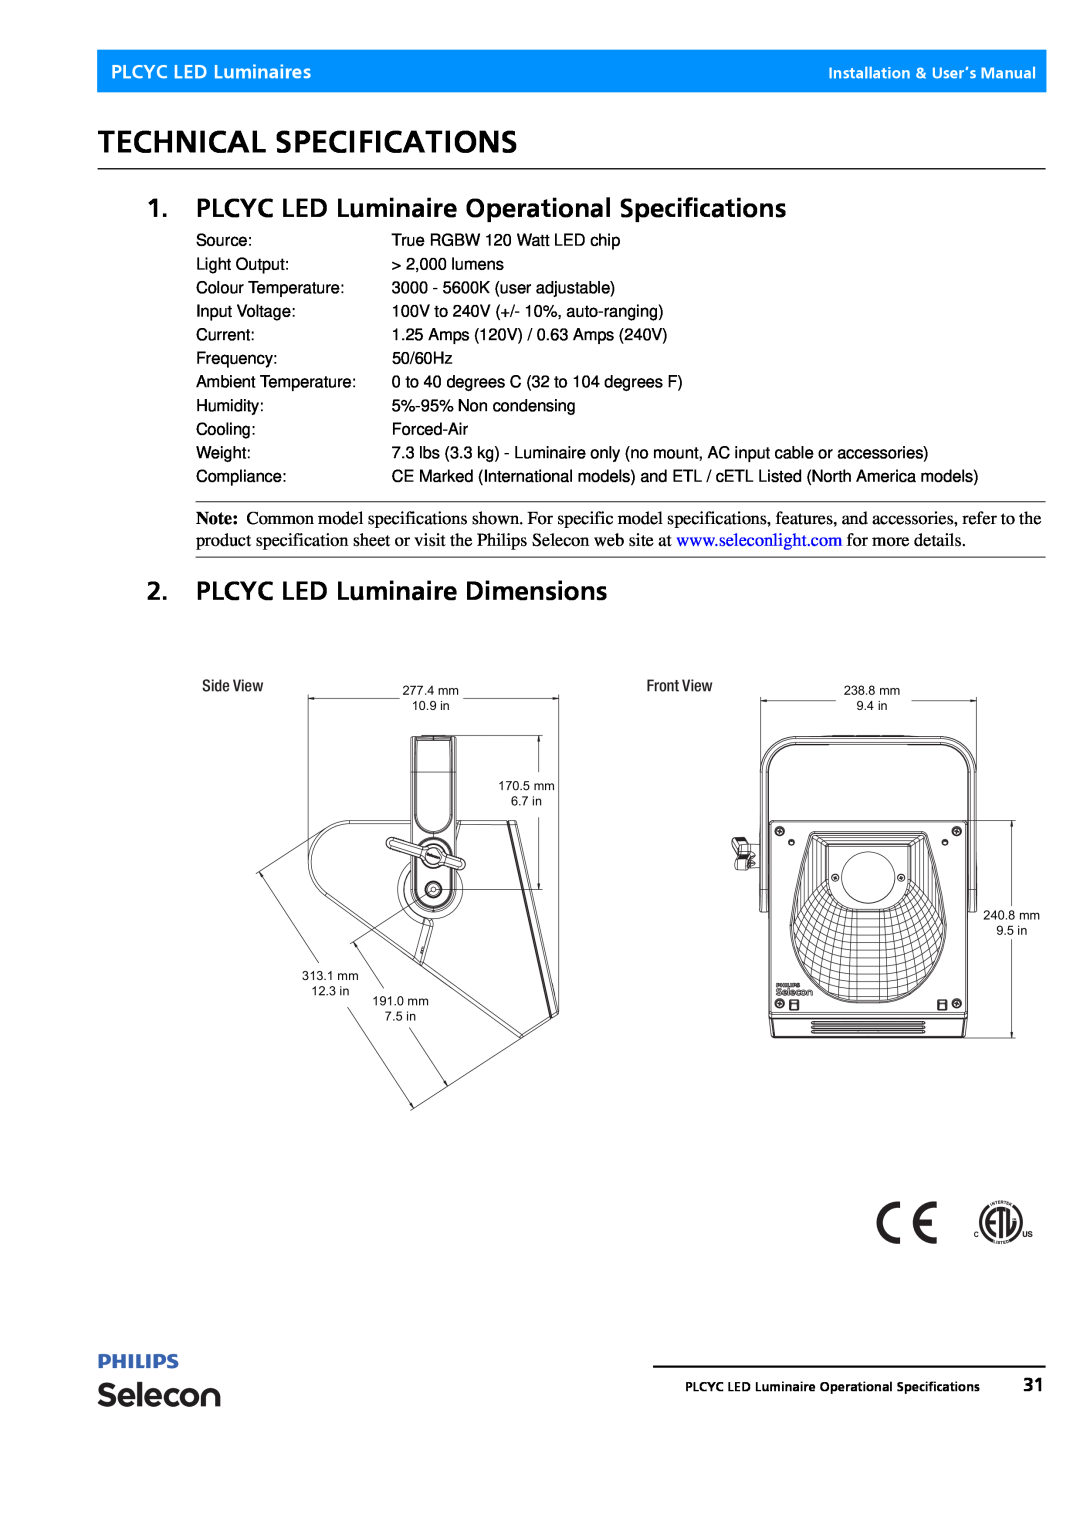 Philips Selecon Technical Specifications, PLCYC LED Luminaire Operational Specifications, PLCYC LED Luminaire Dimensions 